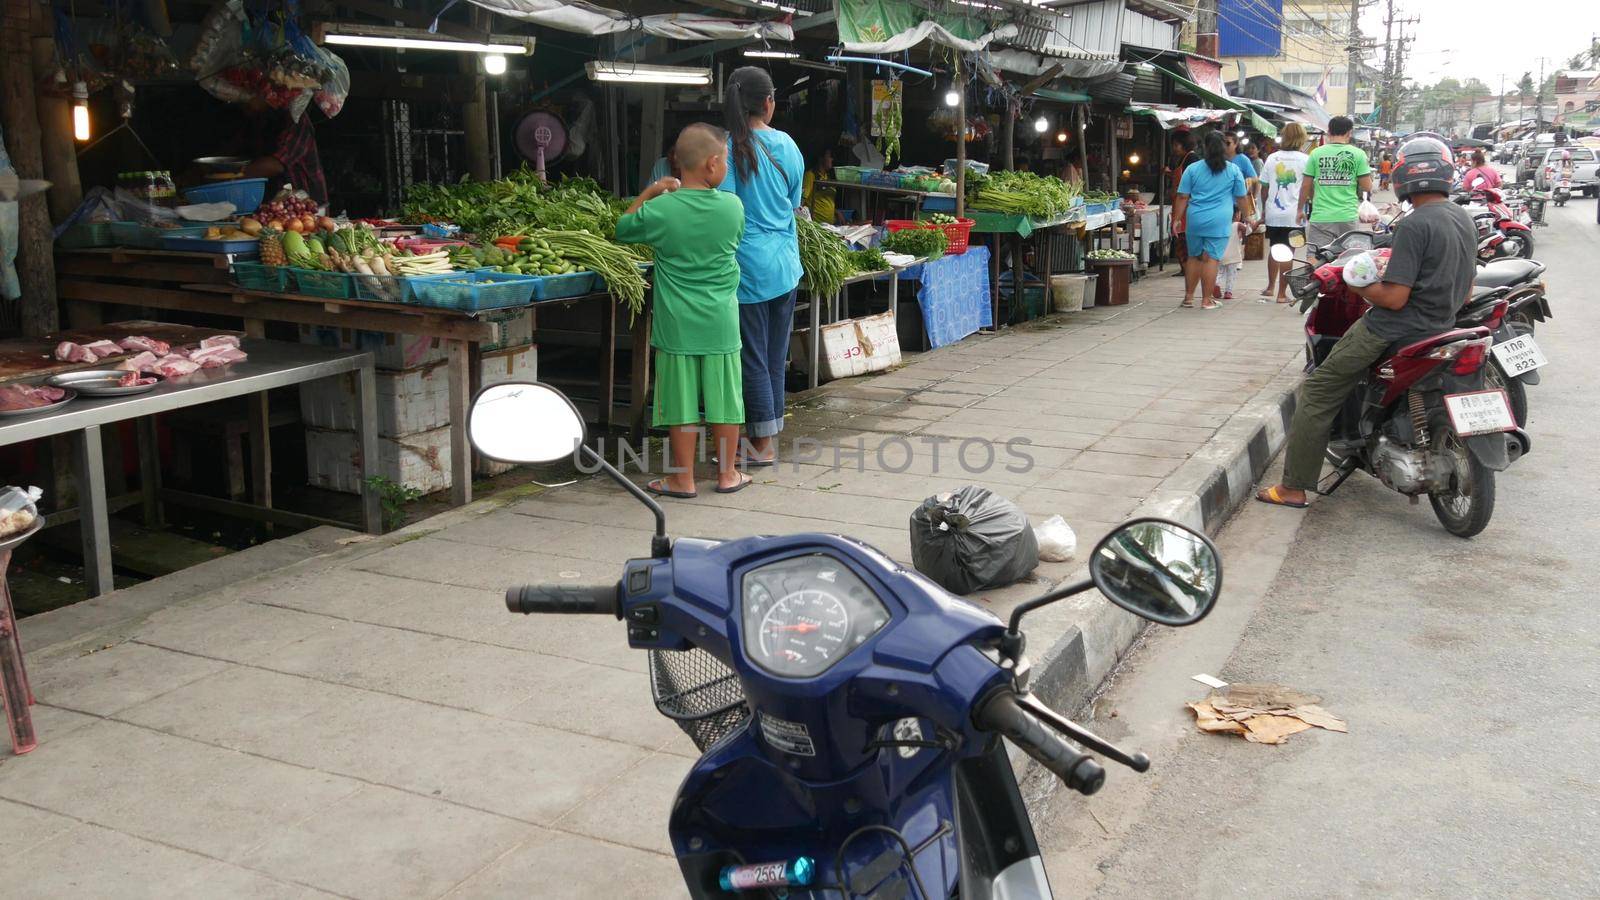 KOH SAMUI ISLAND, THAILAND - 10 JULY 2019: Food market for locals. Lively ranks with groceries. Typical daily life on the street in Asia. People go shopping for fruits vegetables, seafood and meat